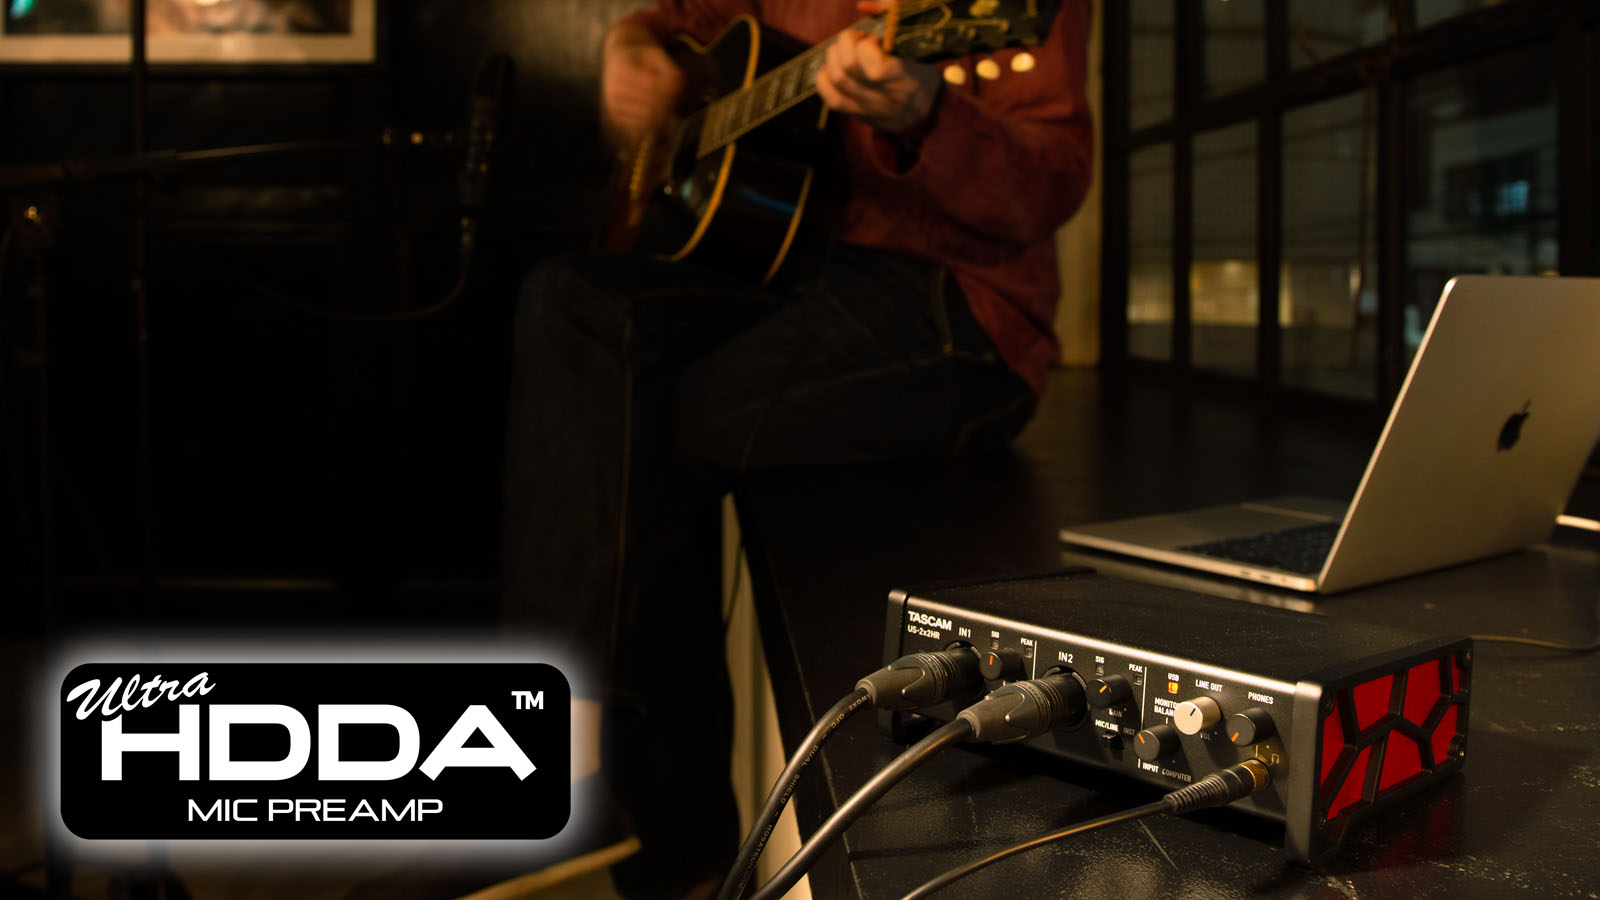 Natural, crisp & clear sound quality thanks to the implemented Ultra HDDA Mic Preamp with 192 kHz support